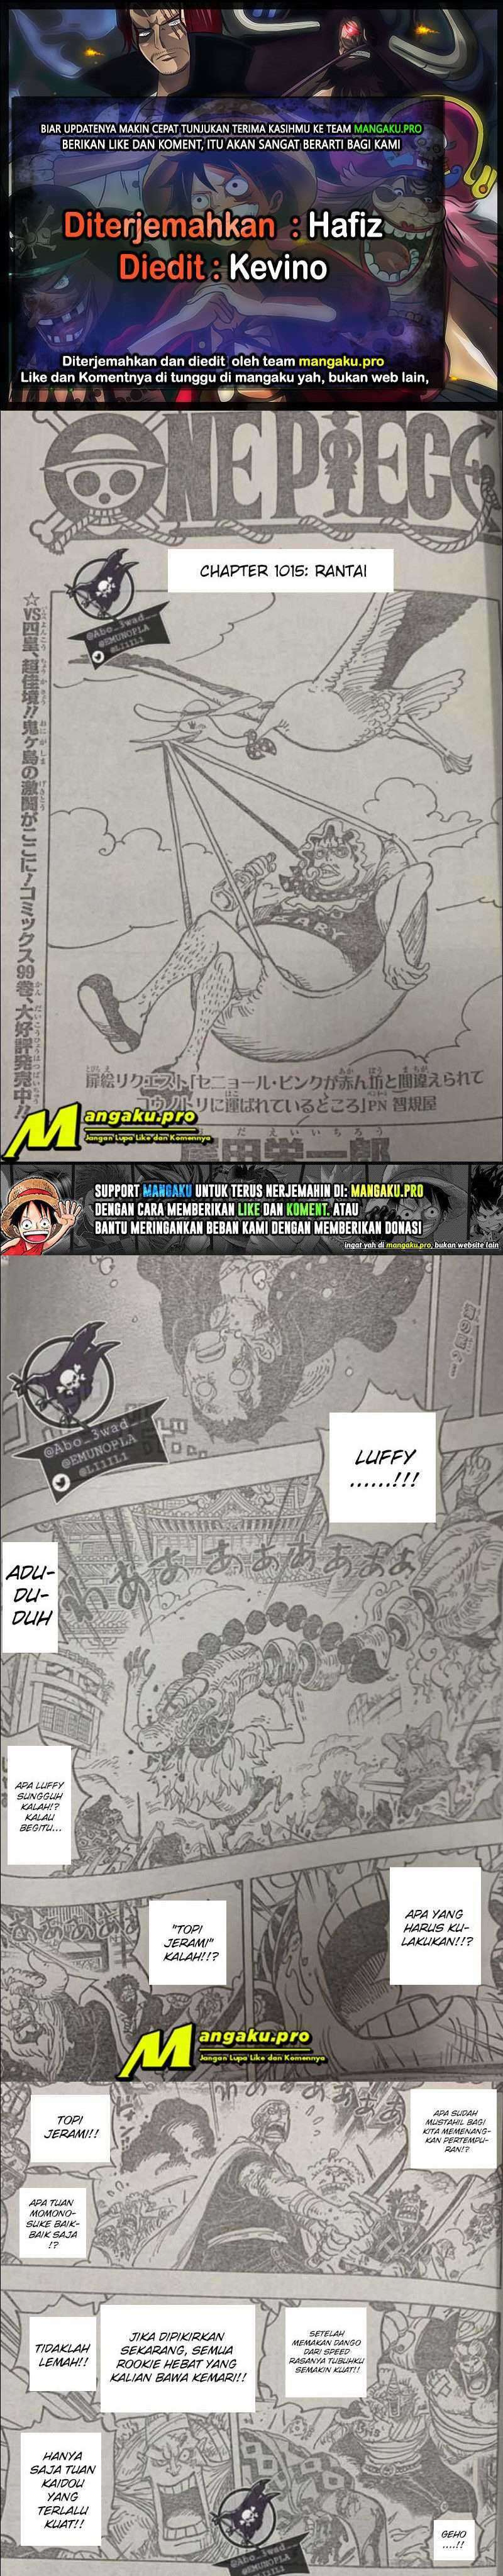 One Piece Chapter 1015 lq Image 0